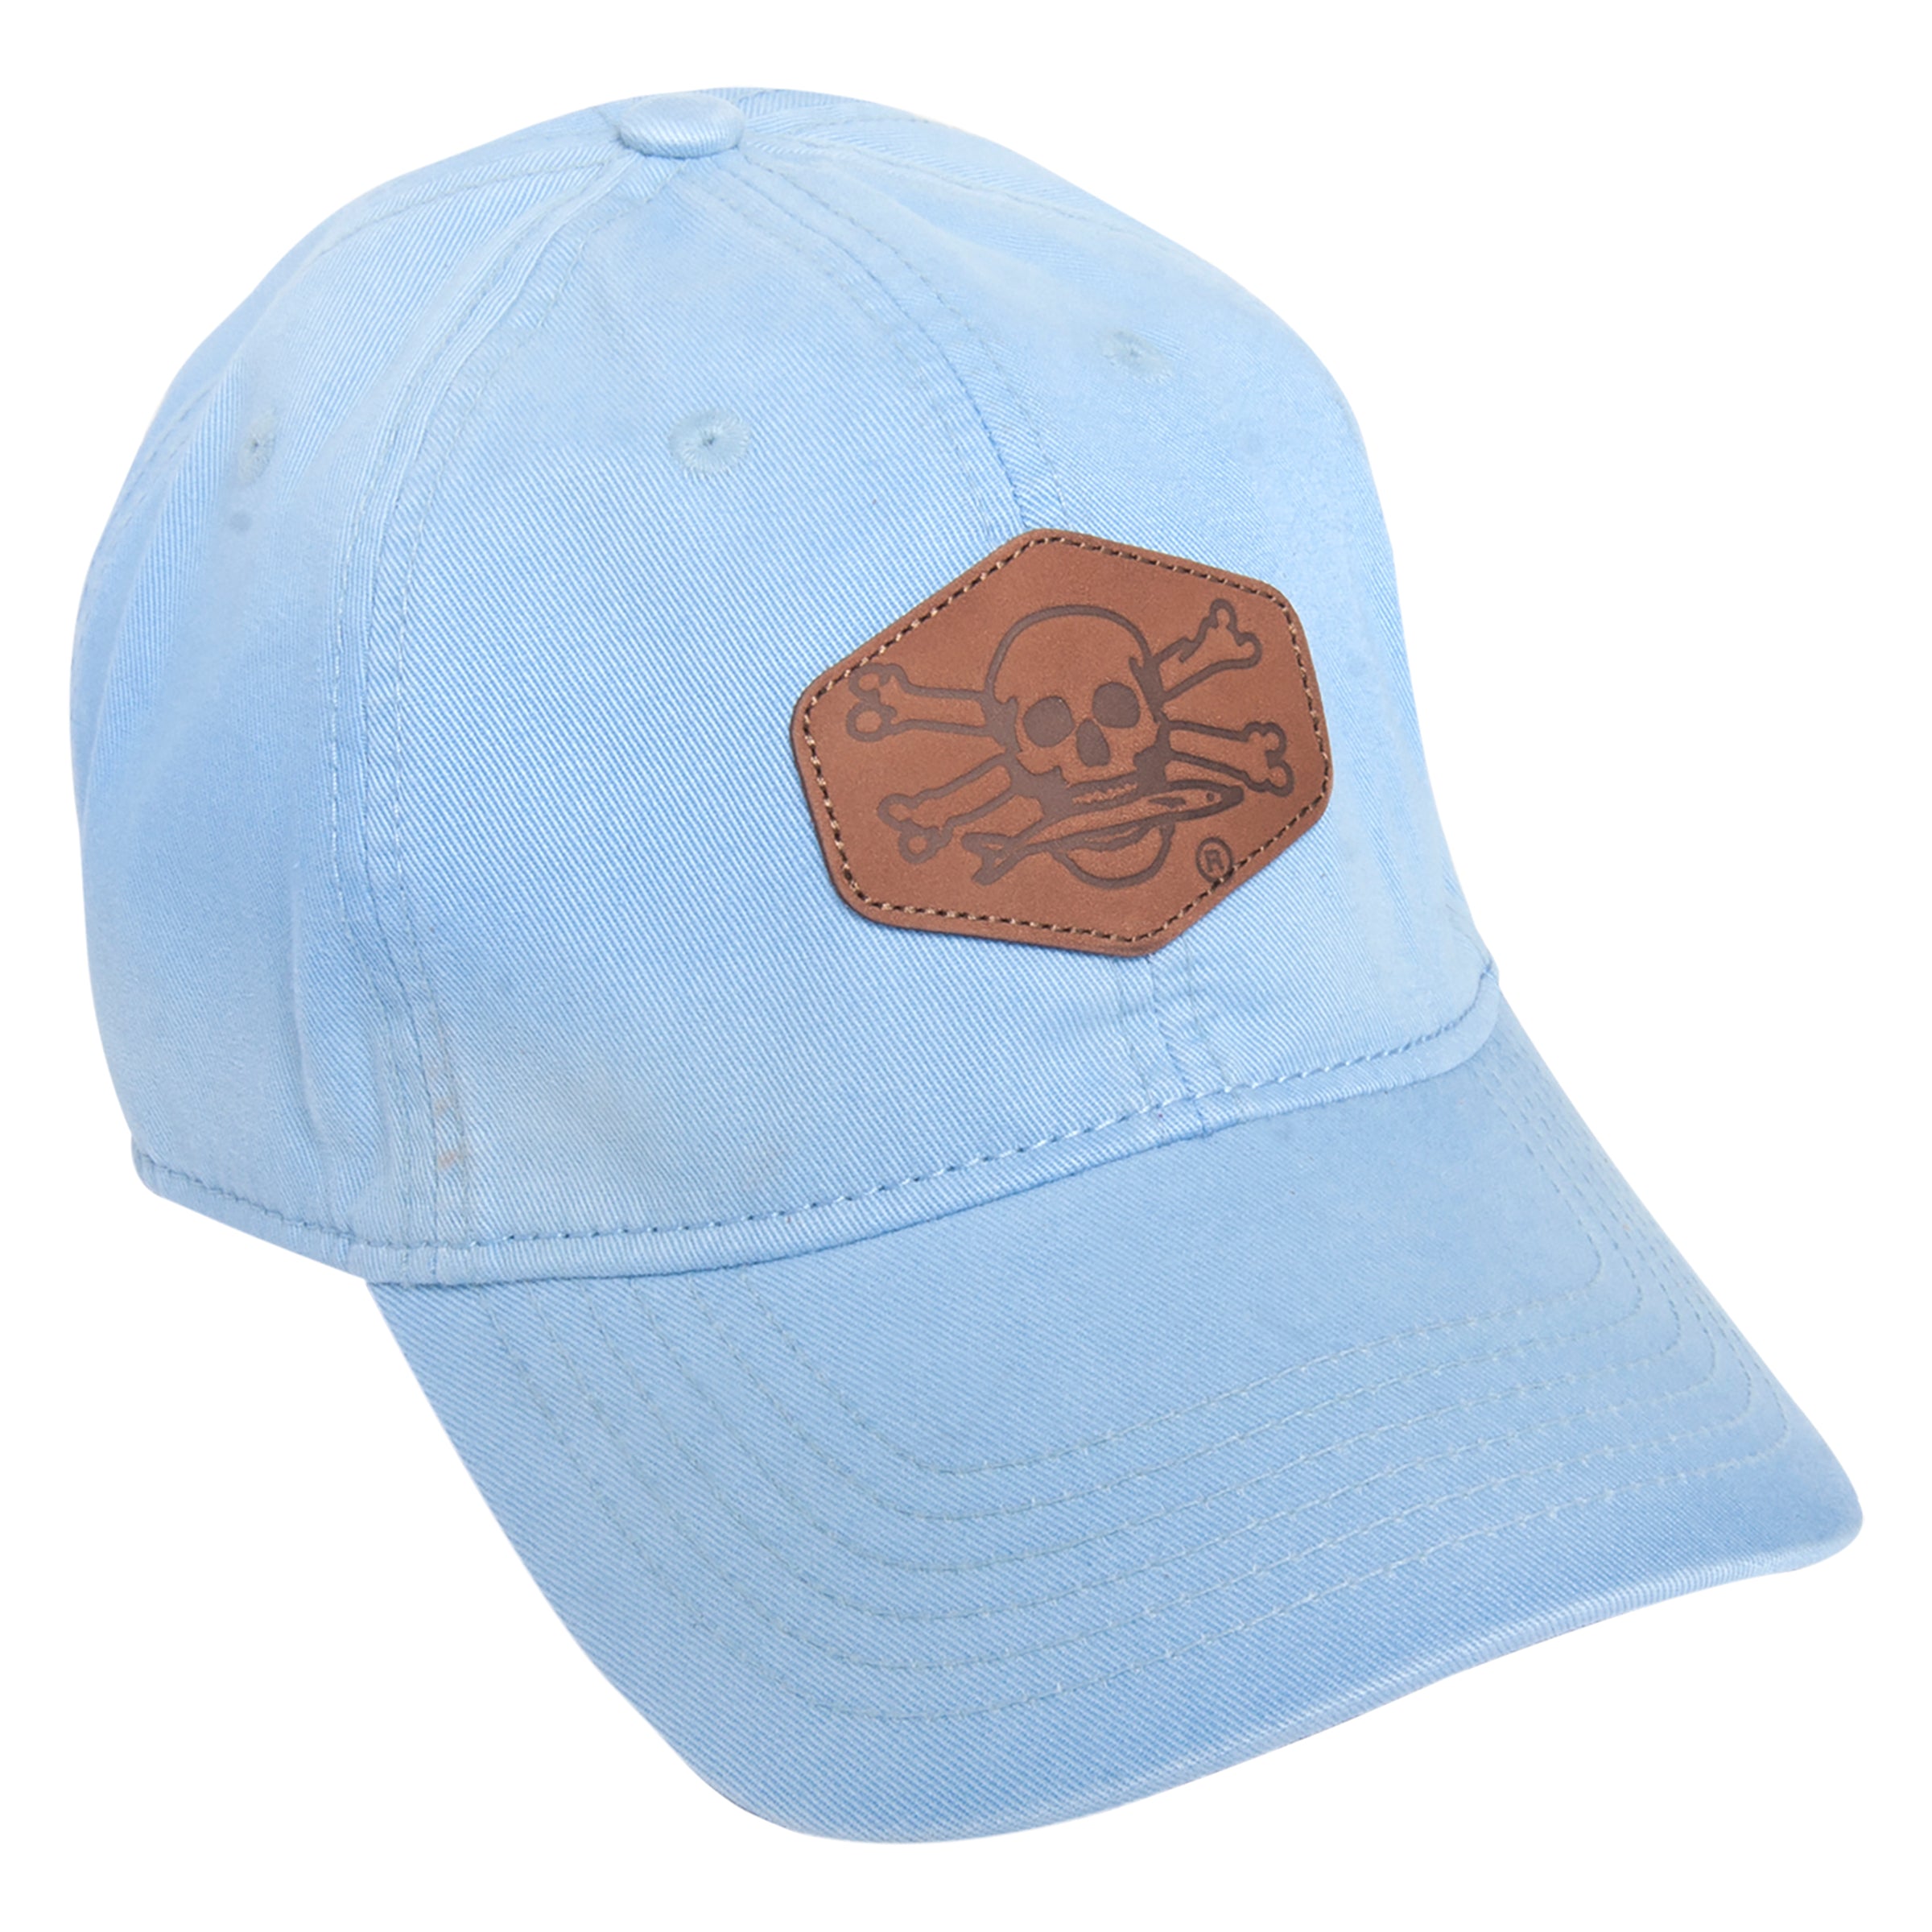 Light blue Calcutta hat with leather patch